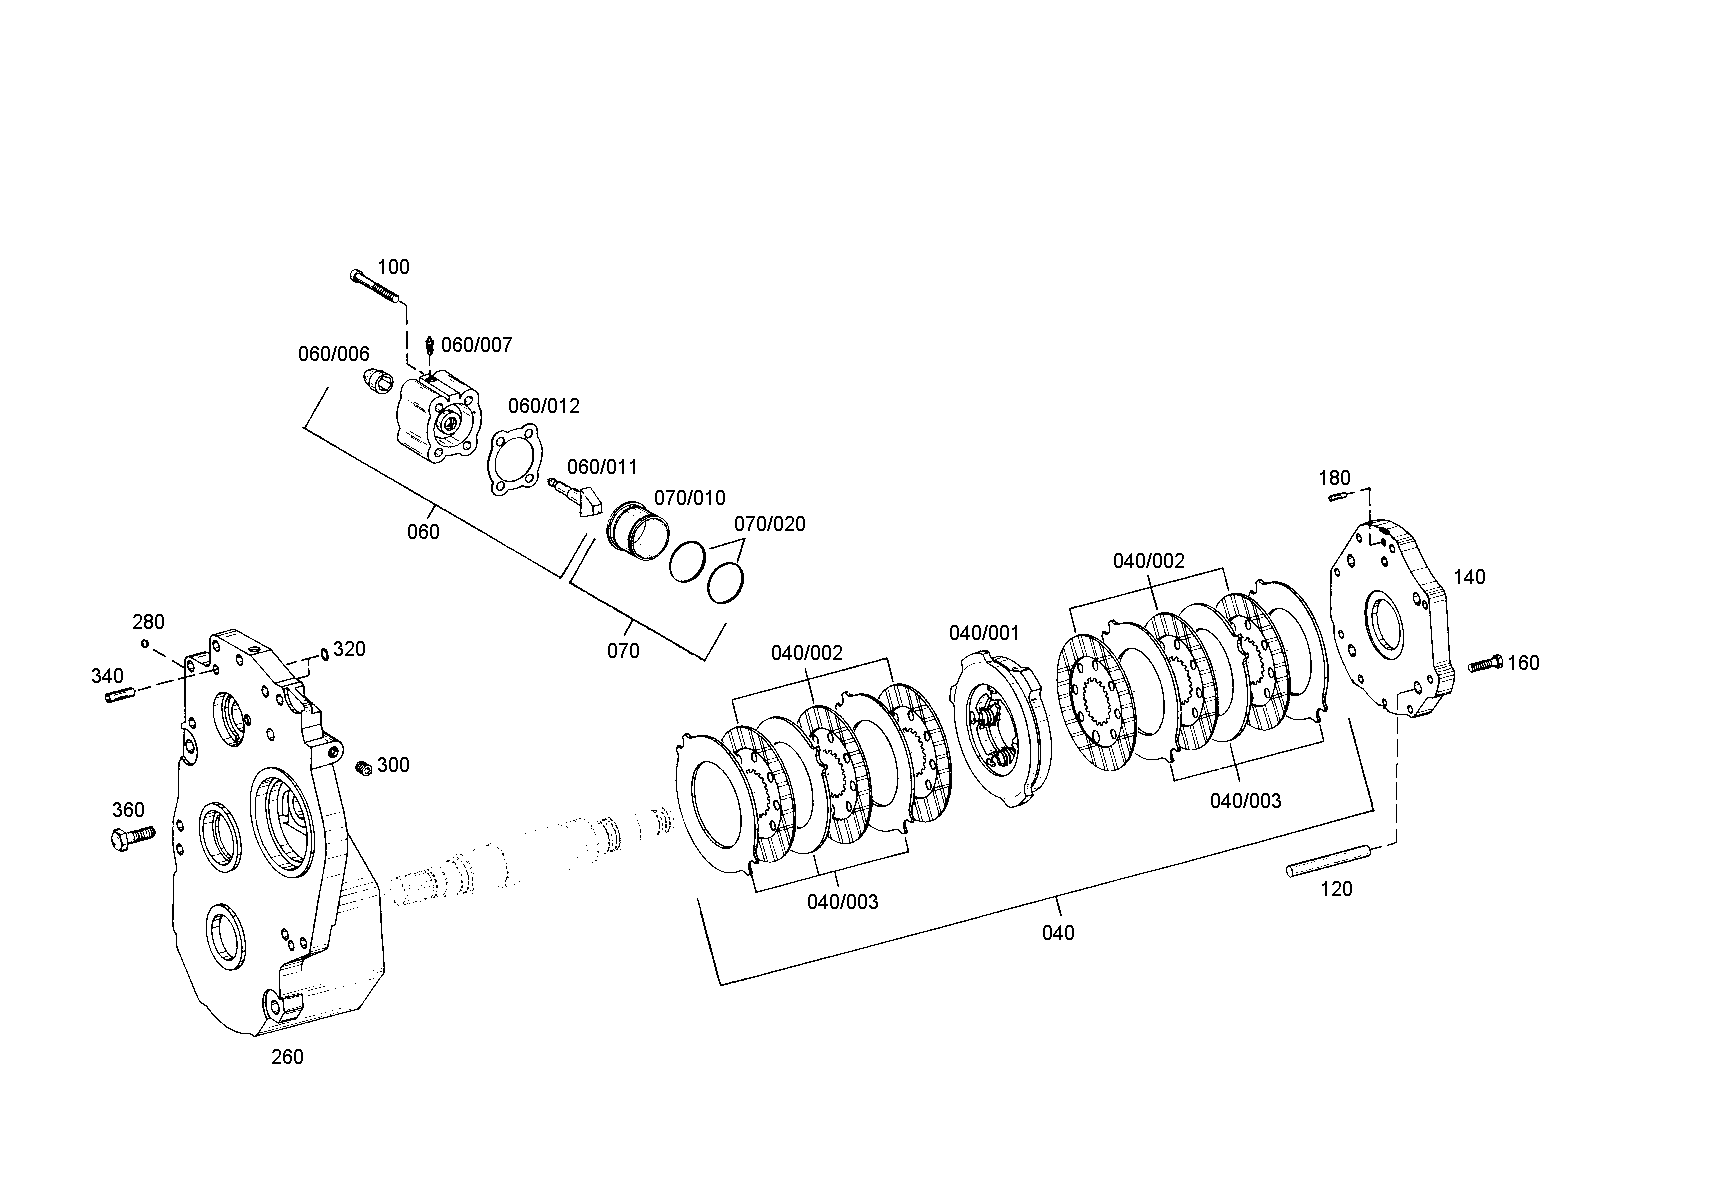 drawing for AGCO F824100070110 - KEY (figure 1)